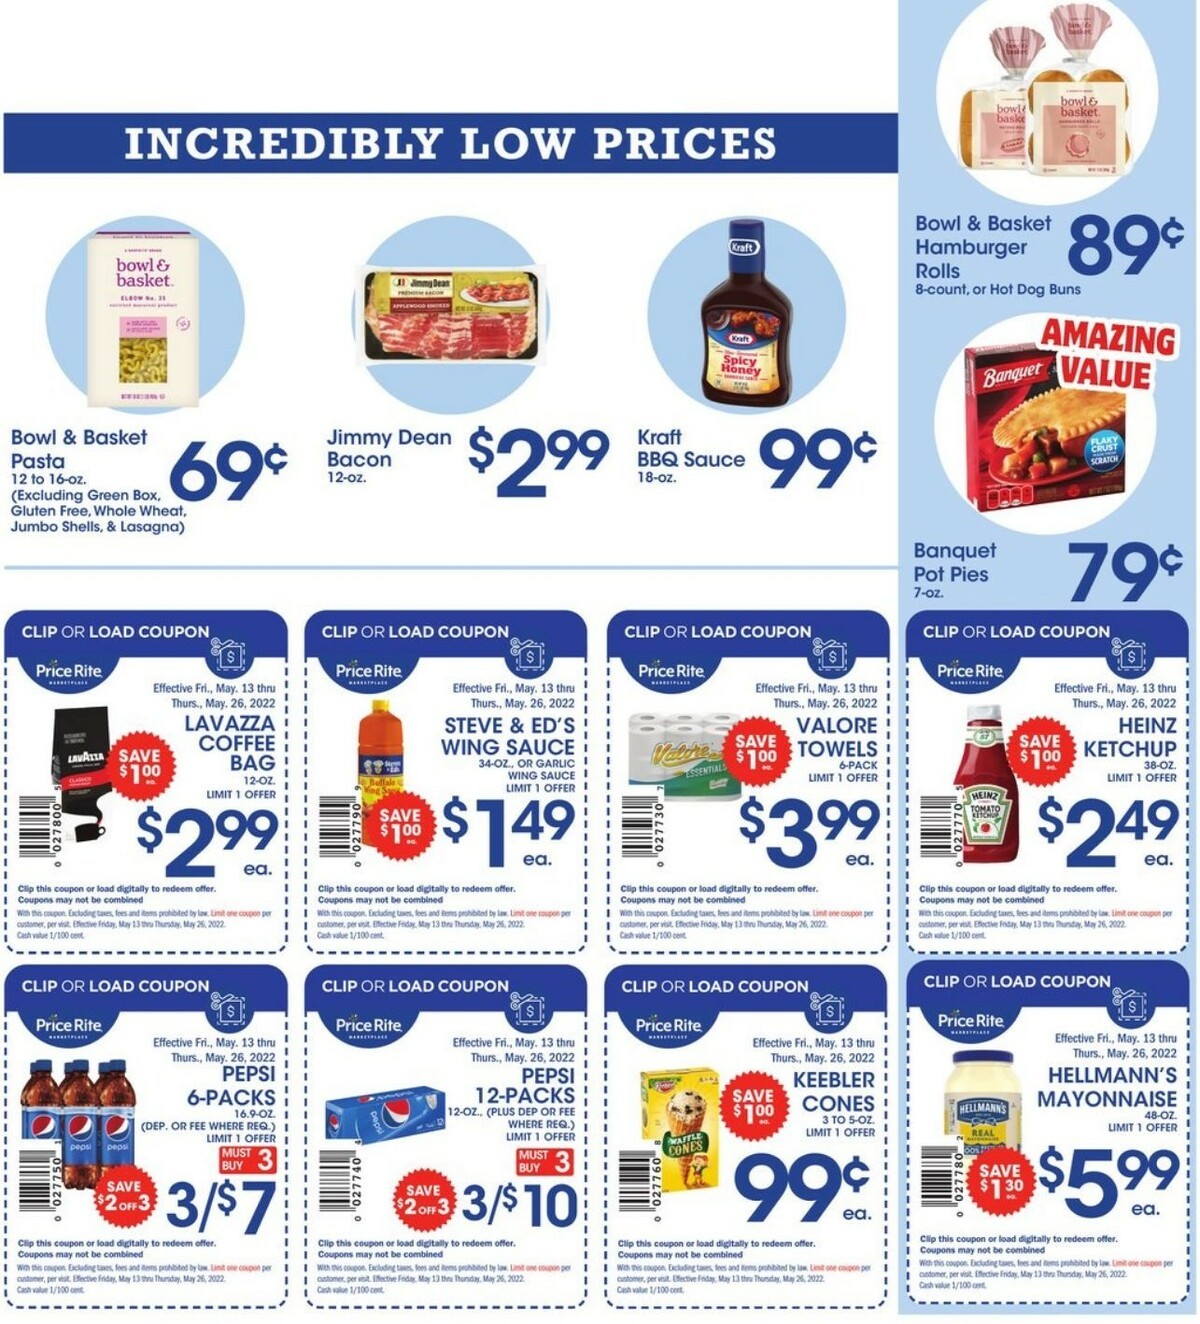 Price Rite Weekly Ad from May 13